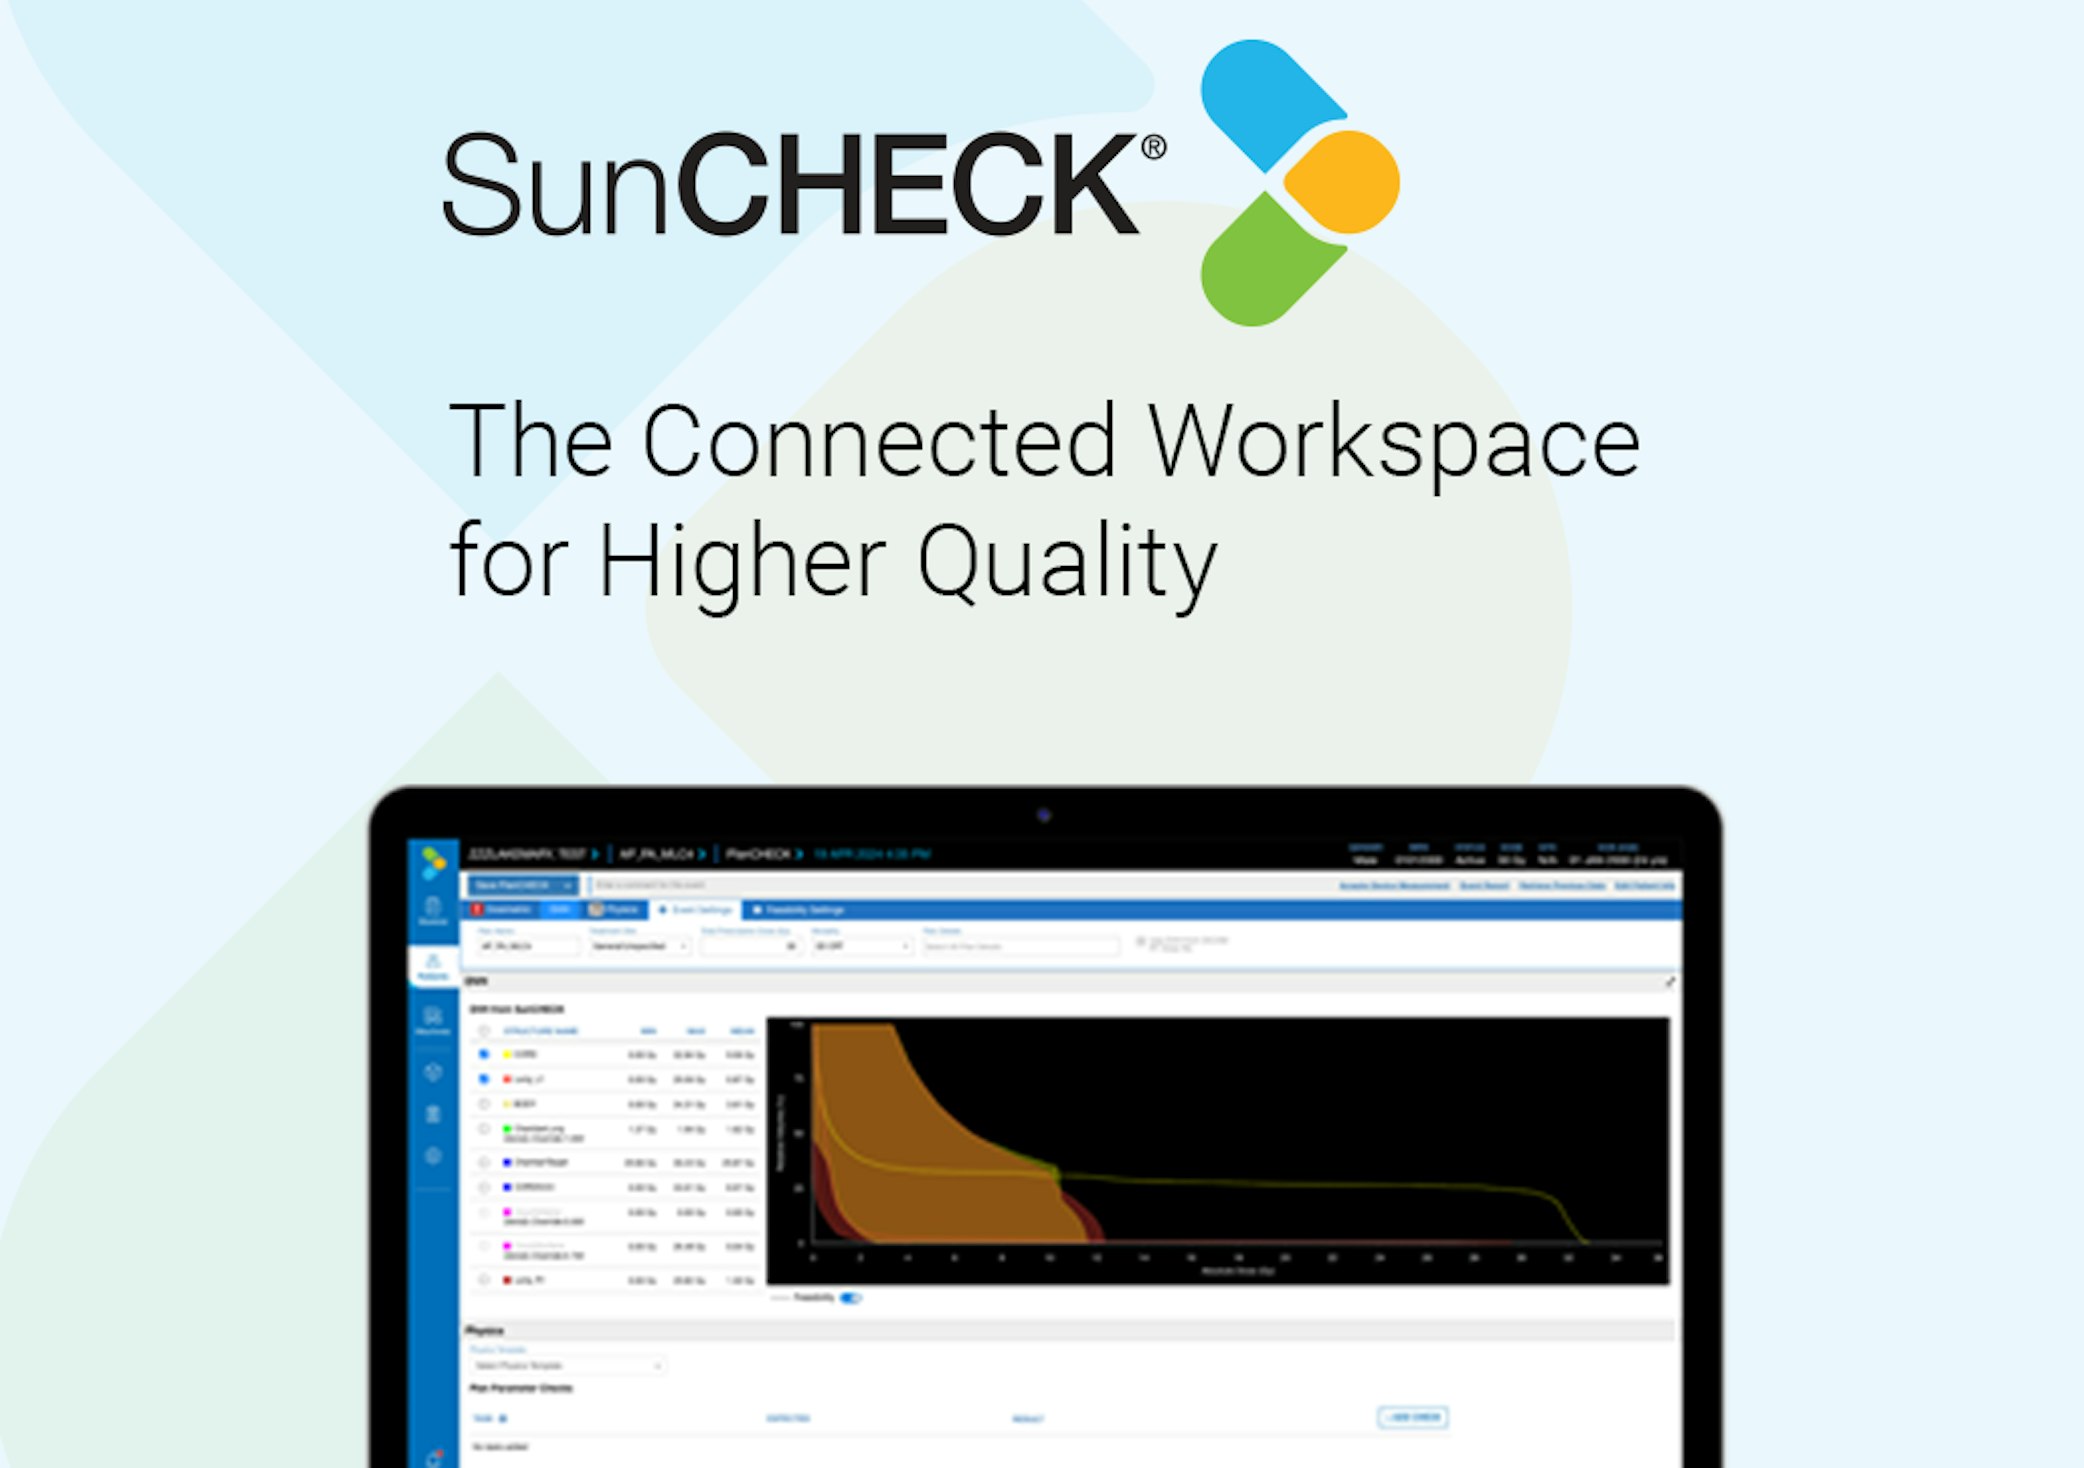 Suncheck sunnuclear press release homepage